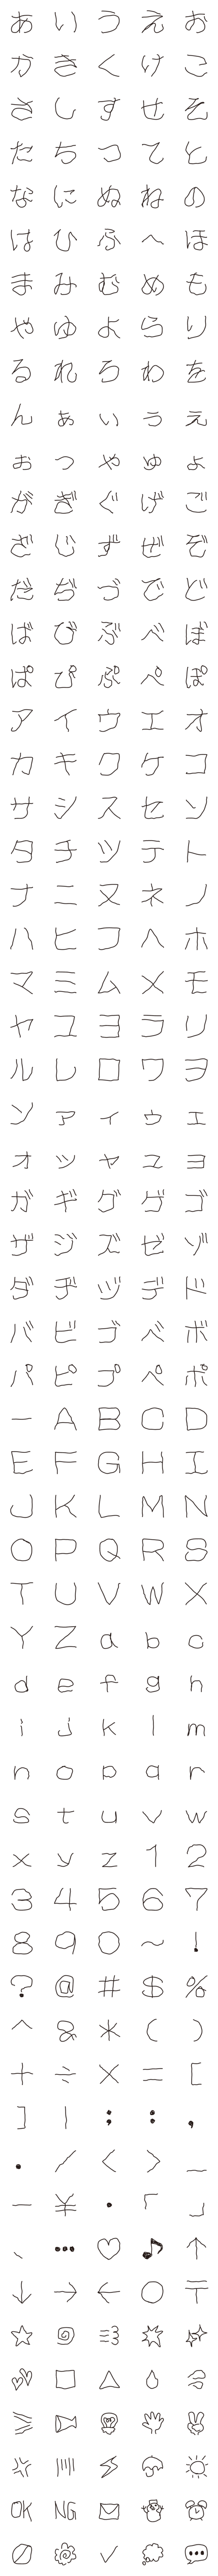 [LINE絵文字]【汚文字】デコ文字 絵文字の画像一覧